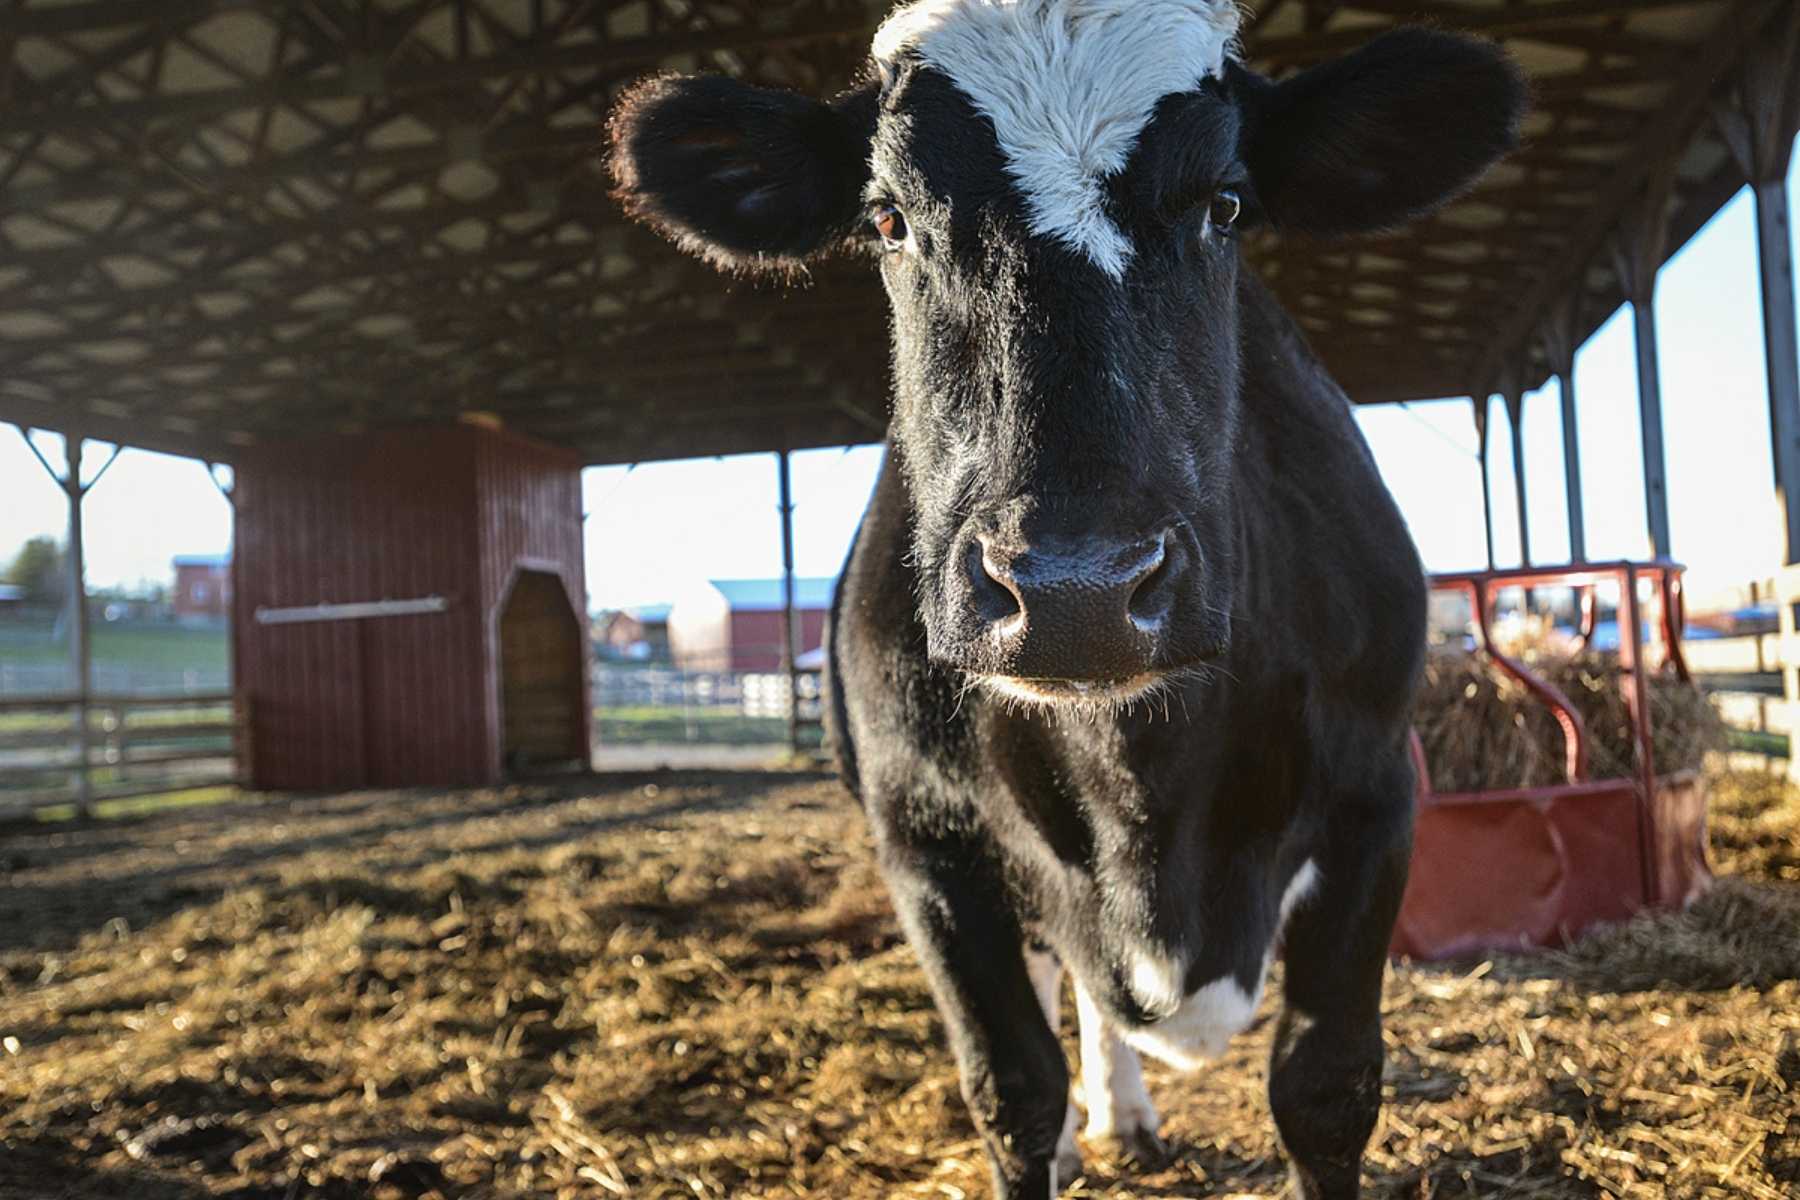 Fanny, a dairy cow, was considered "spent", and was being sent to slaughter when she was rescued by Farm Sanctuary, where she lived out her life.